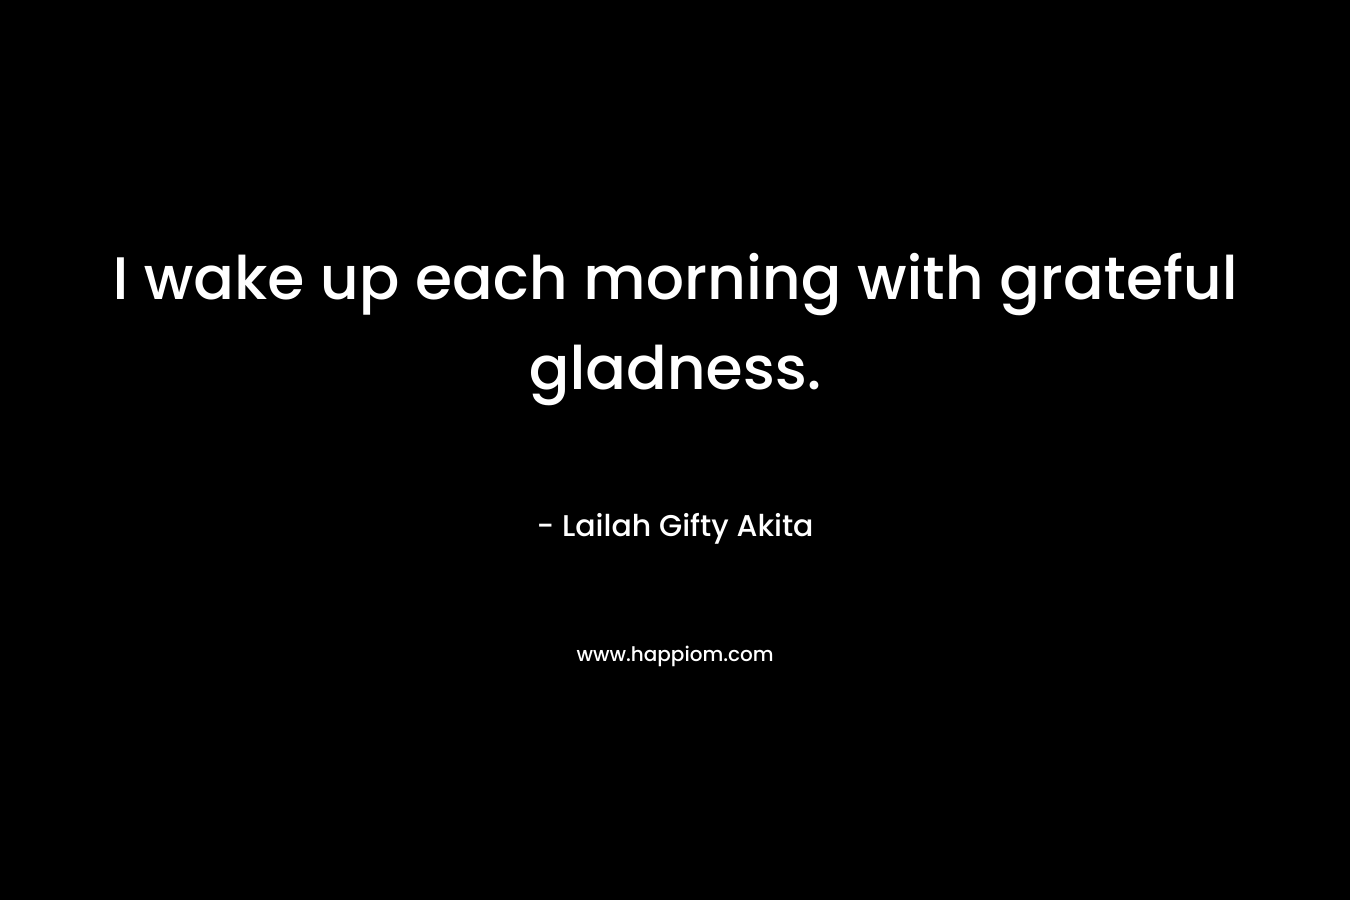 I wake up each morning with grateful gladness.